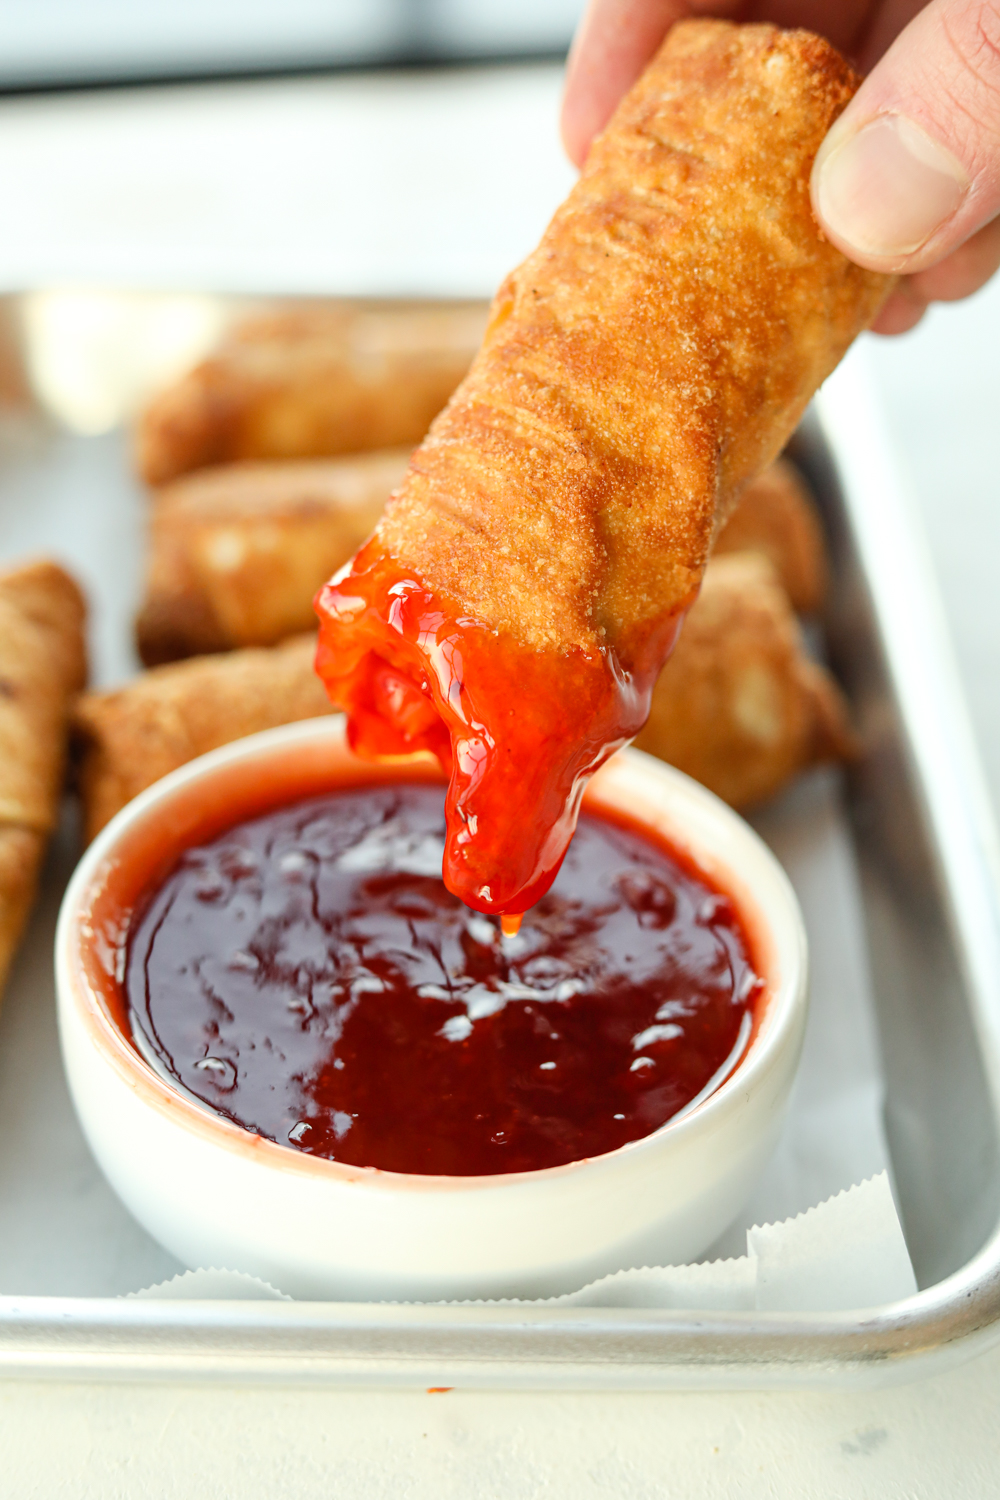 Fingertips holding an eggroll with a bite out of the front of it covered and sweet-and-sour sauce. The eggroll is being held over sweet-and-sour sauce and a white top and behind the cup are three other eggrolls on parchment paper on top and baking sheet.